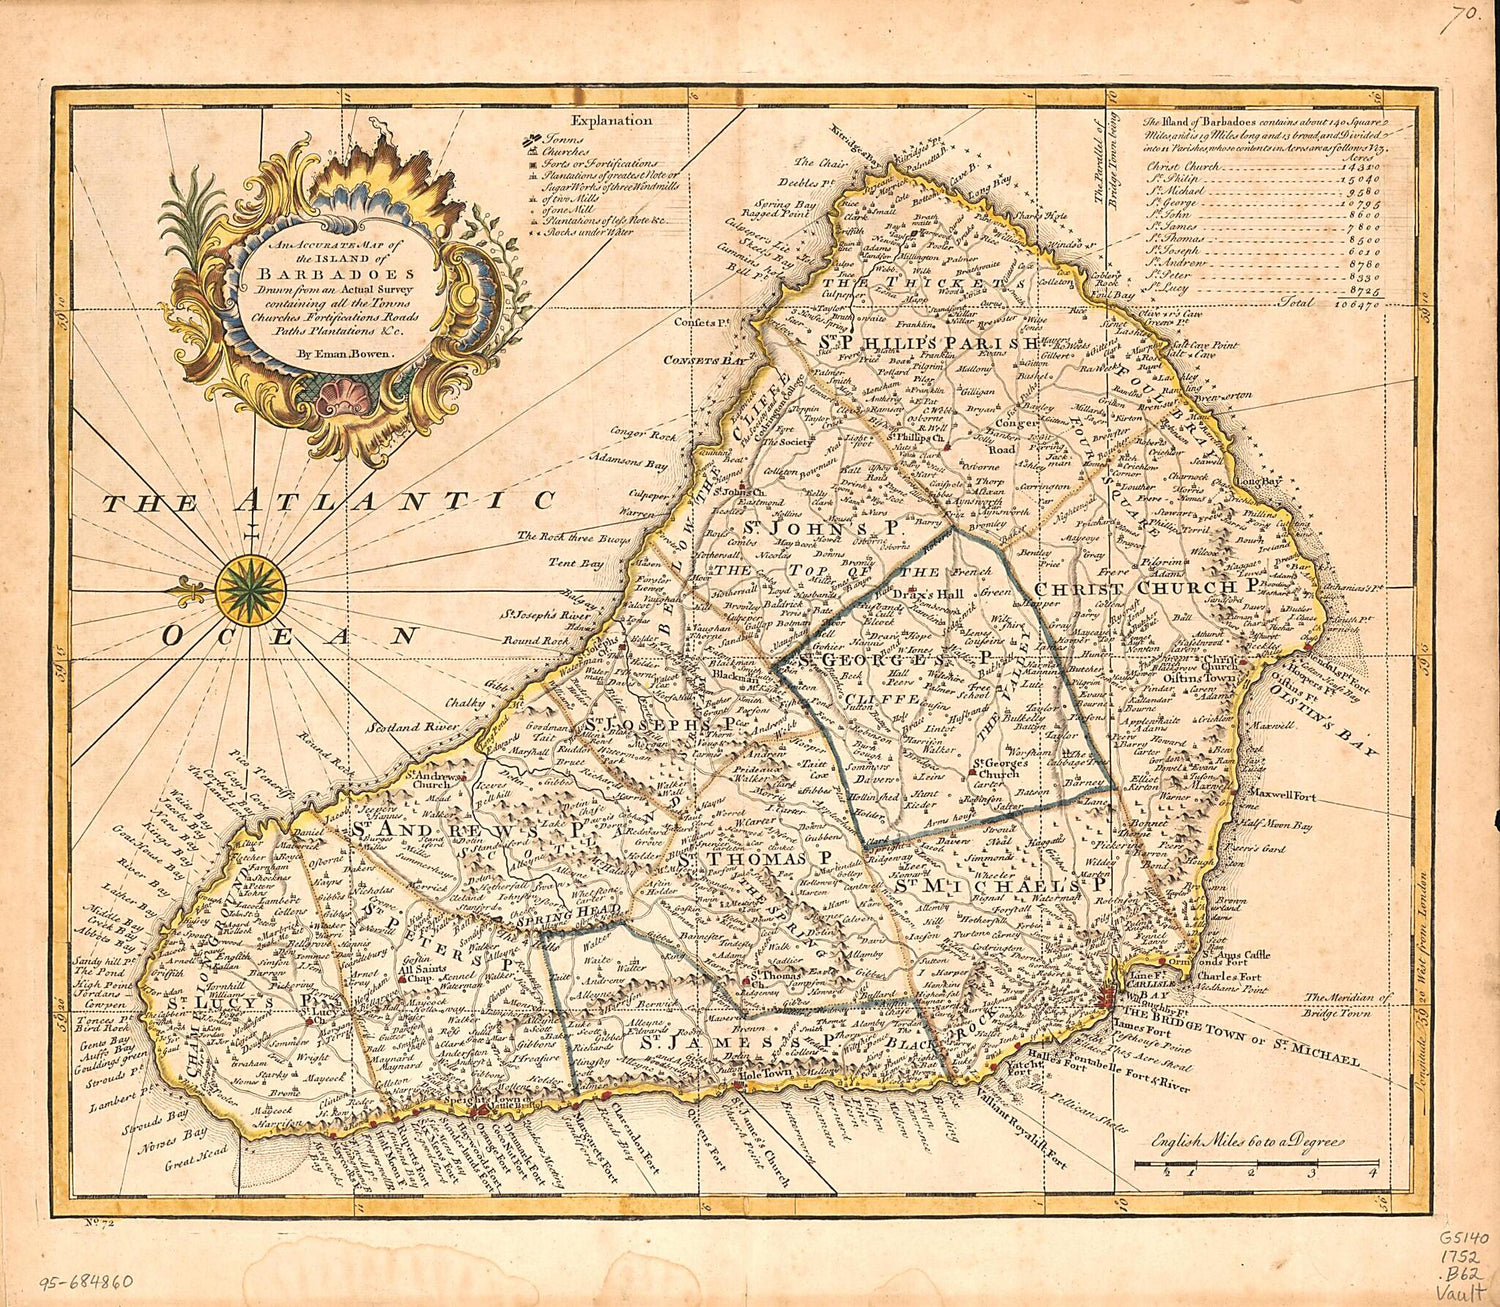 This old map of An Accurate Map of the Island of Barbadoes from 1752 was created by Emanuel Bowen, Jessica Lee in 1752